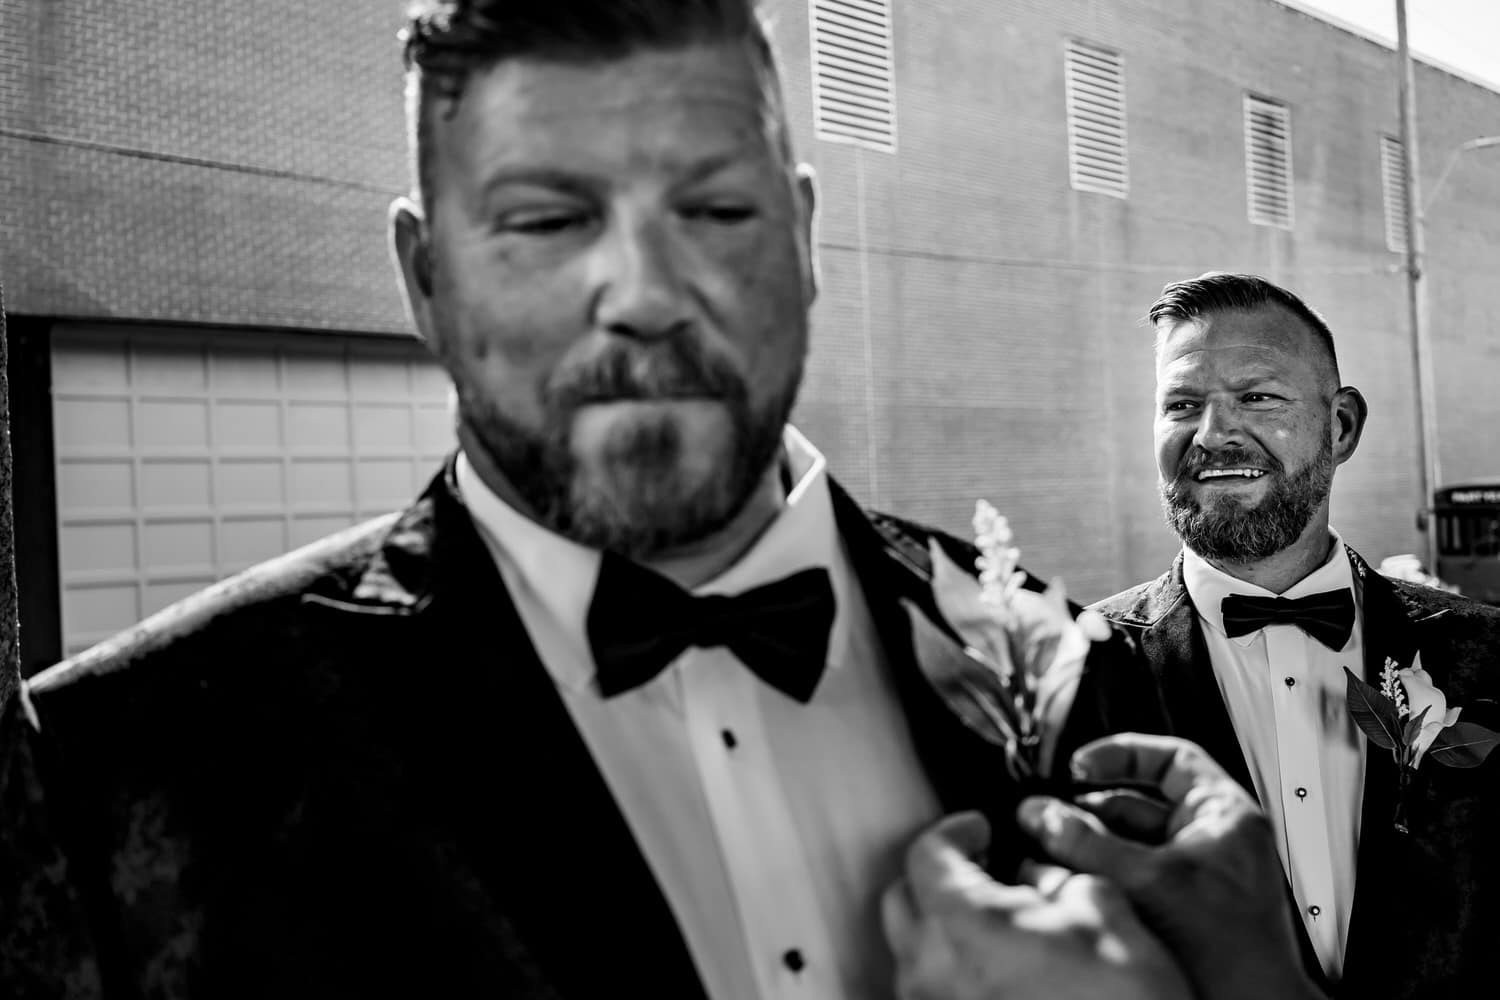 A candid black and white picture of a groom getting a boutionniere pinned on his jacket as his groom watches on from the background. 